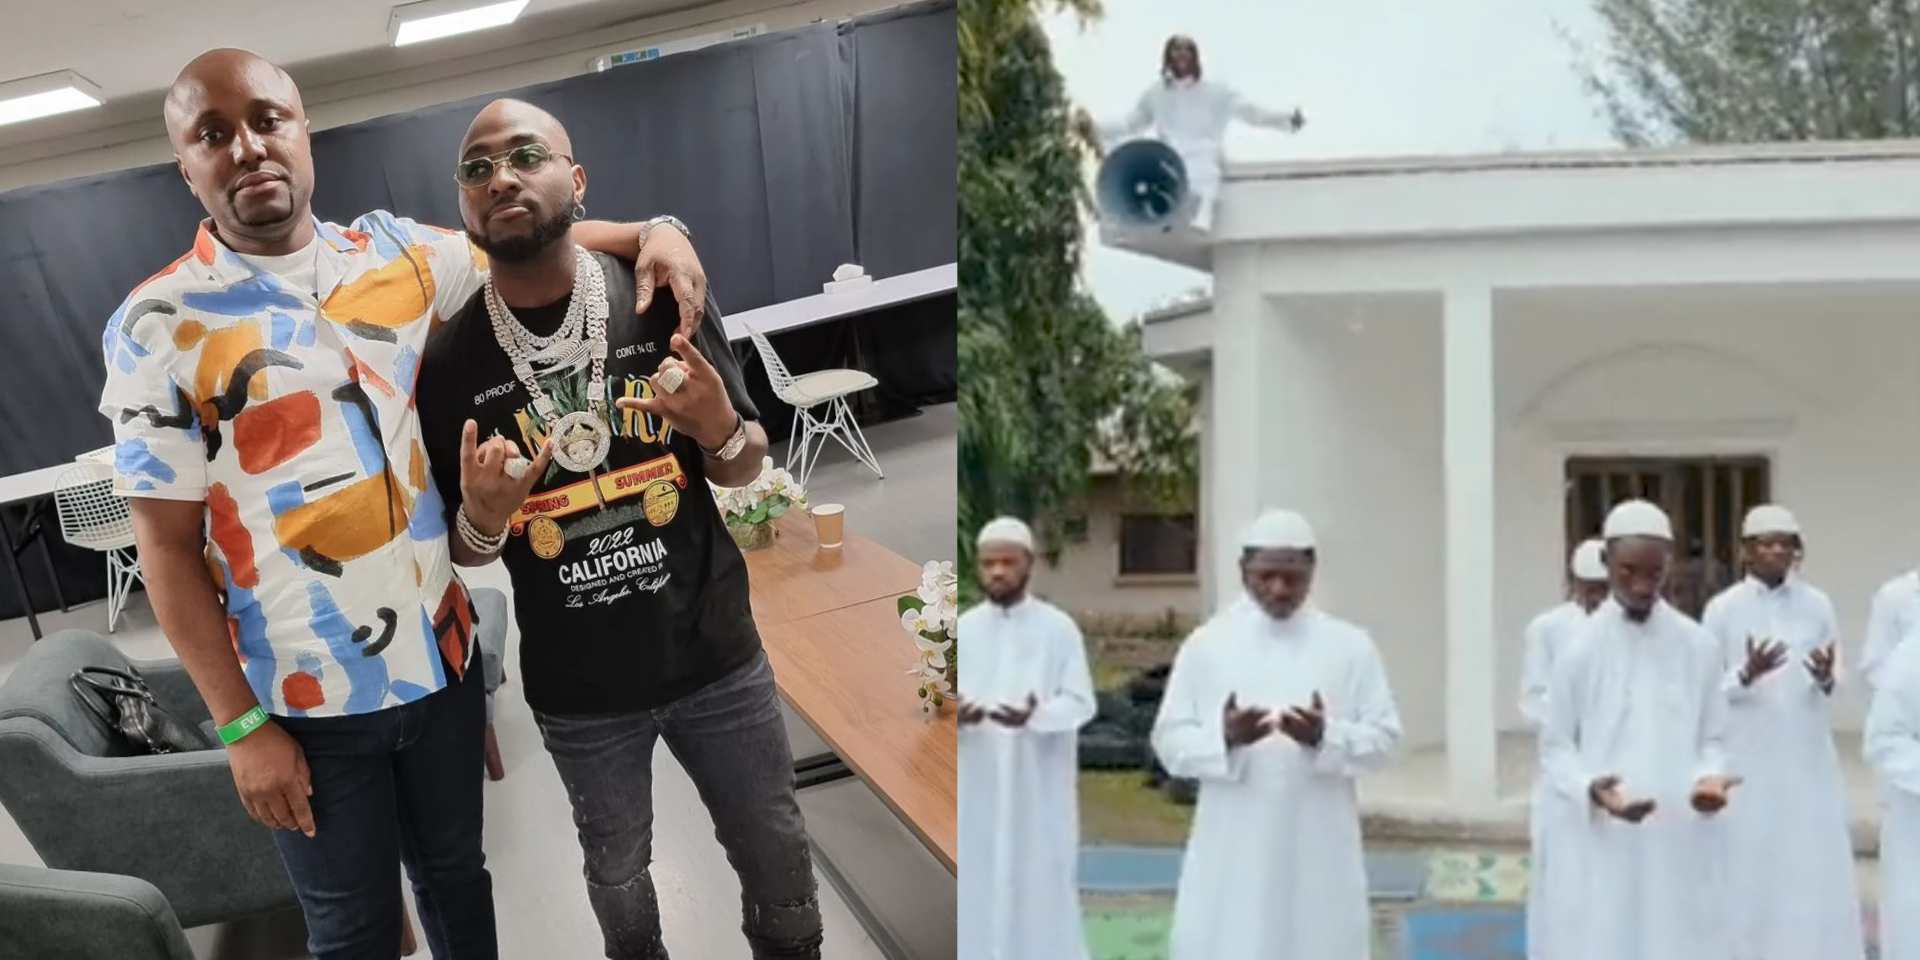 "It was entertainment wrongly presented" – Israel DMW apologizes to Muslims on behalf of Davido